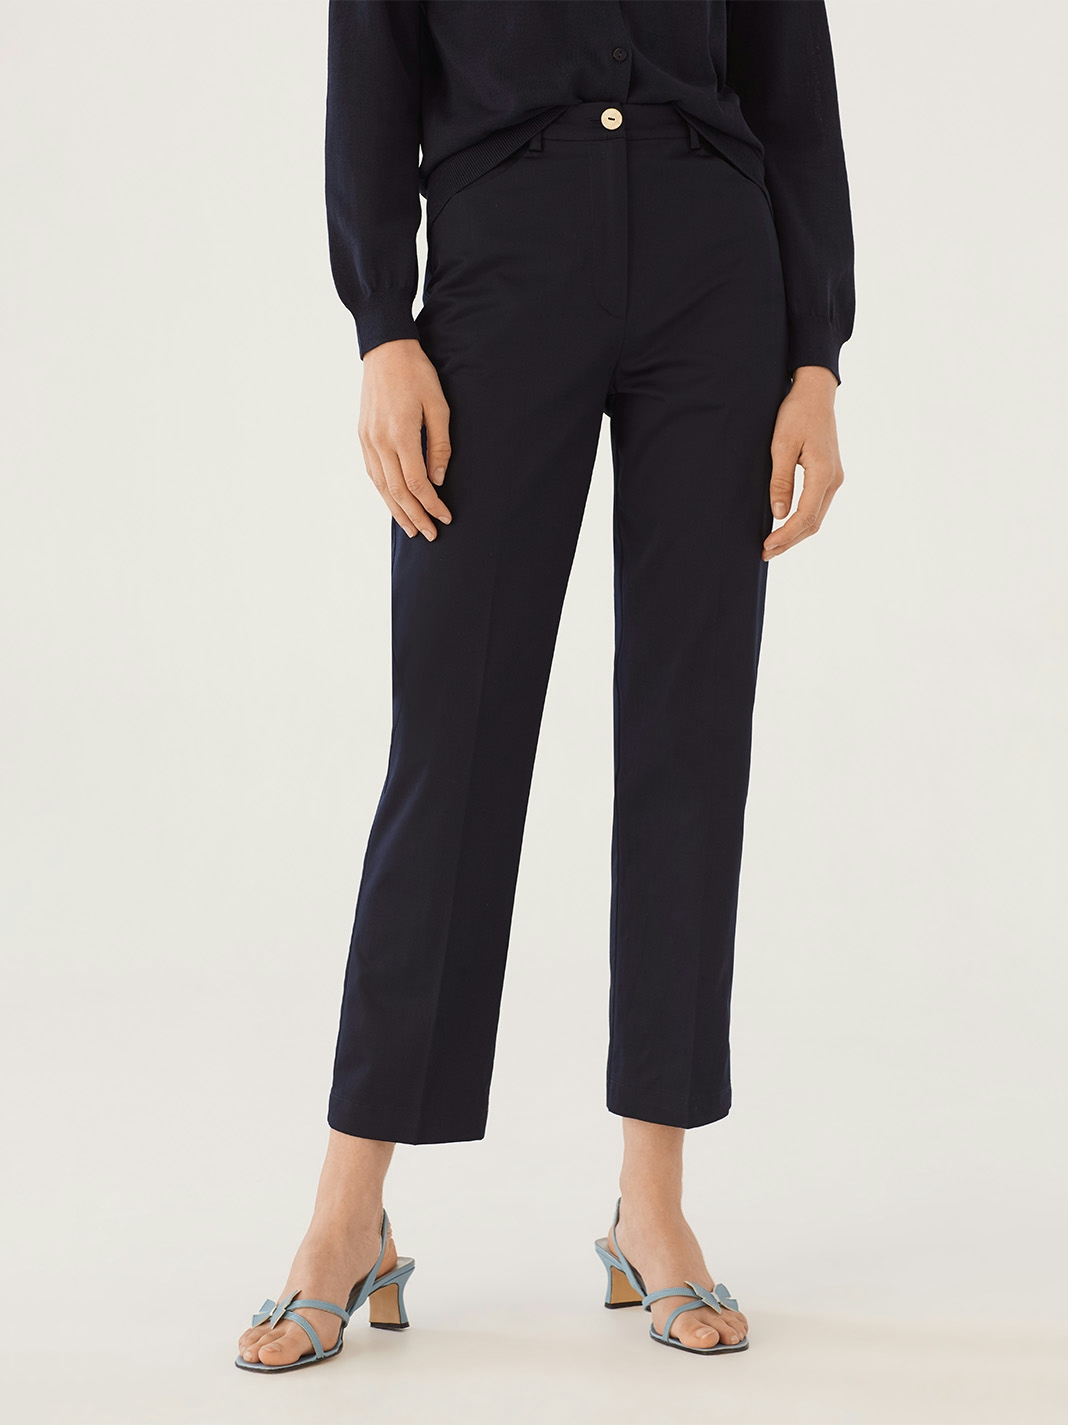 Cotton sateen trousers